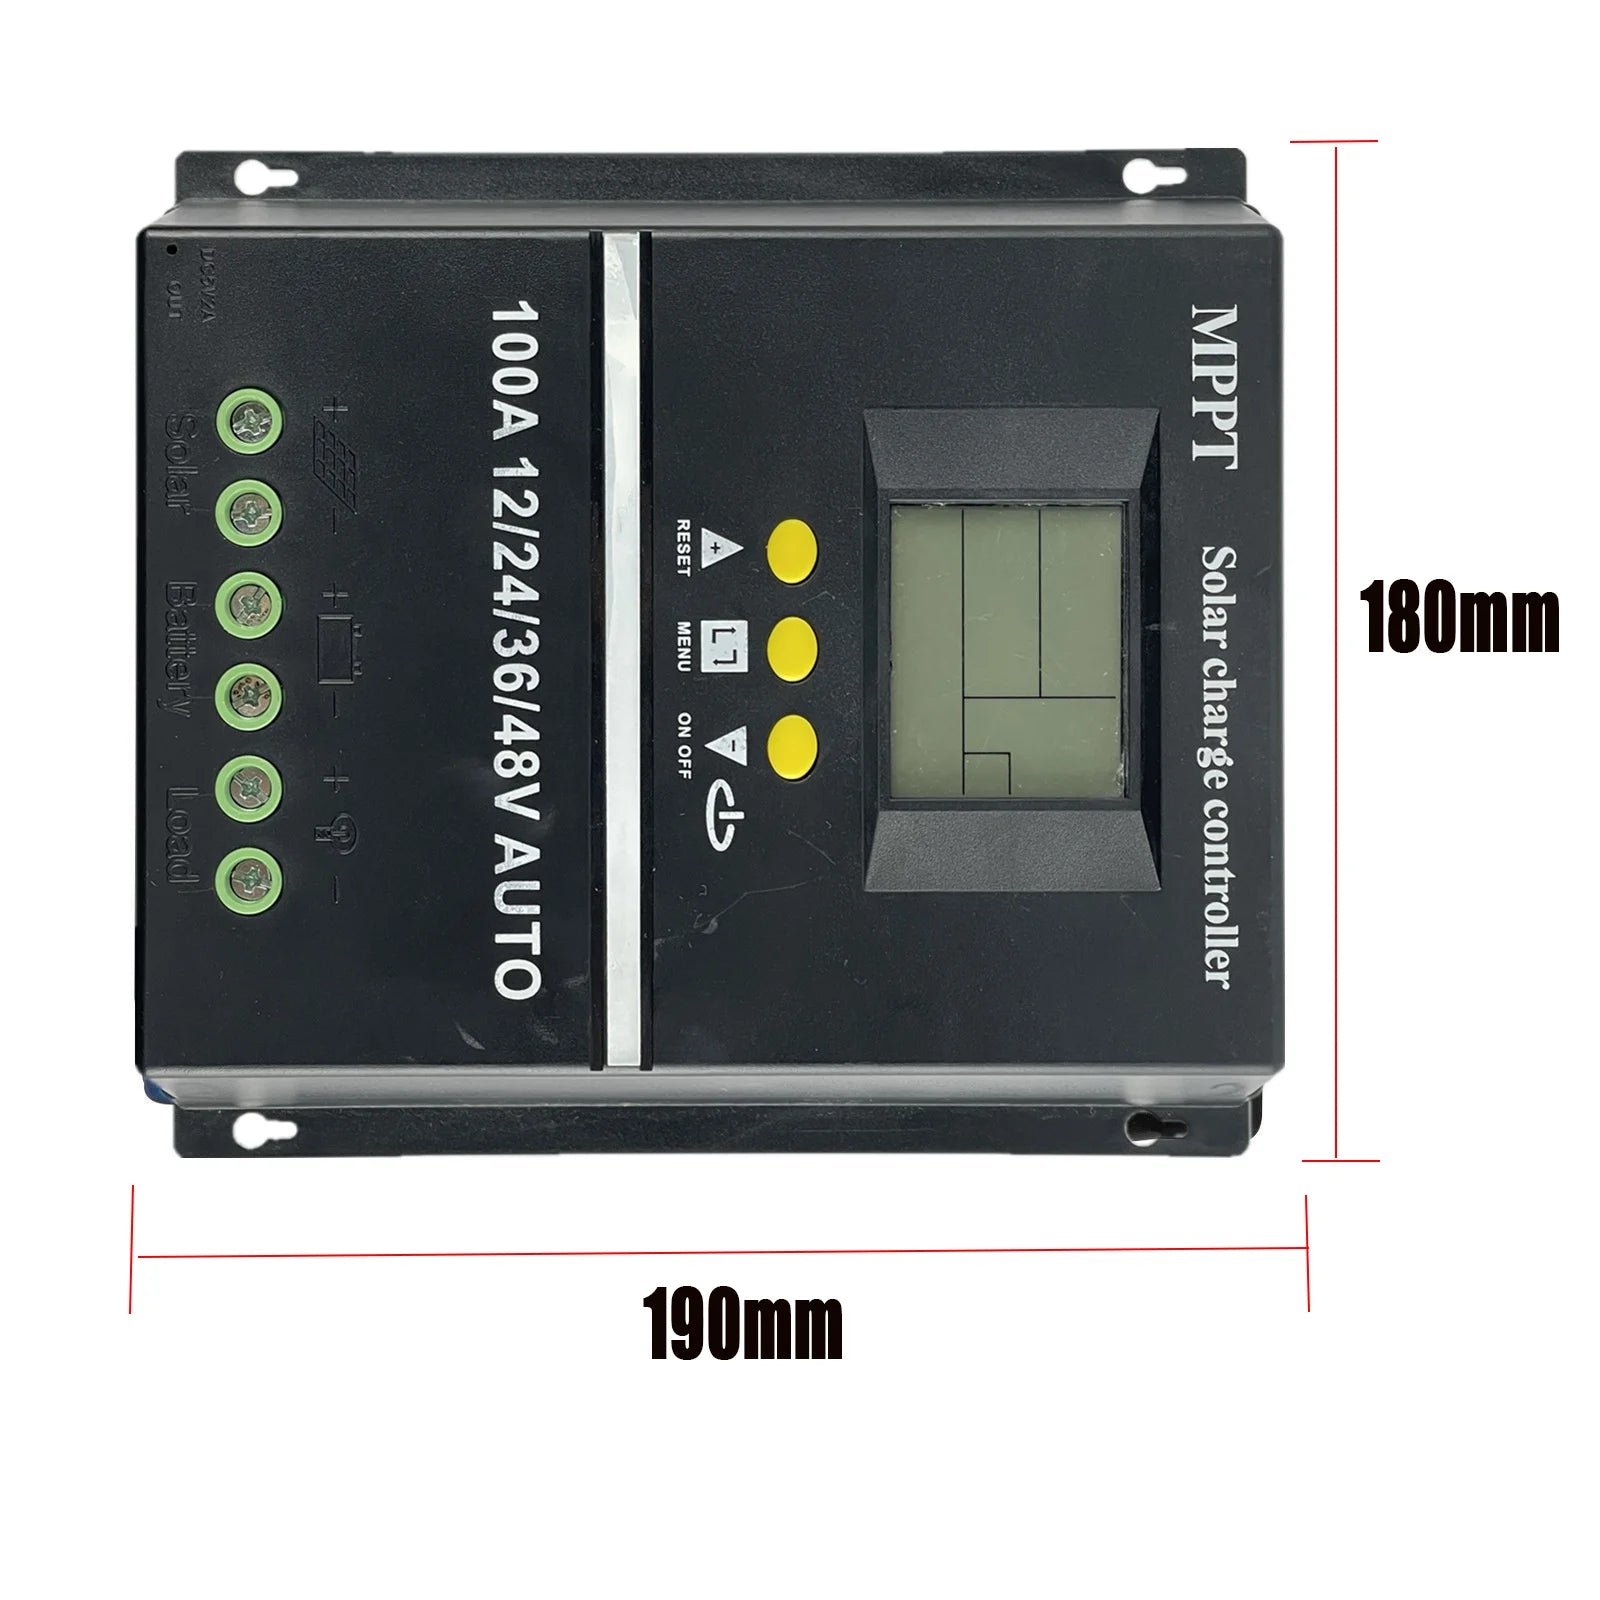 100A/80A/60A MPPT/PWM Solar Charge Controller, Solar charge controller supports up to 100A charging with MPPT tech for efficient energy harvesting.